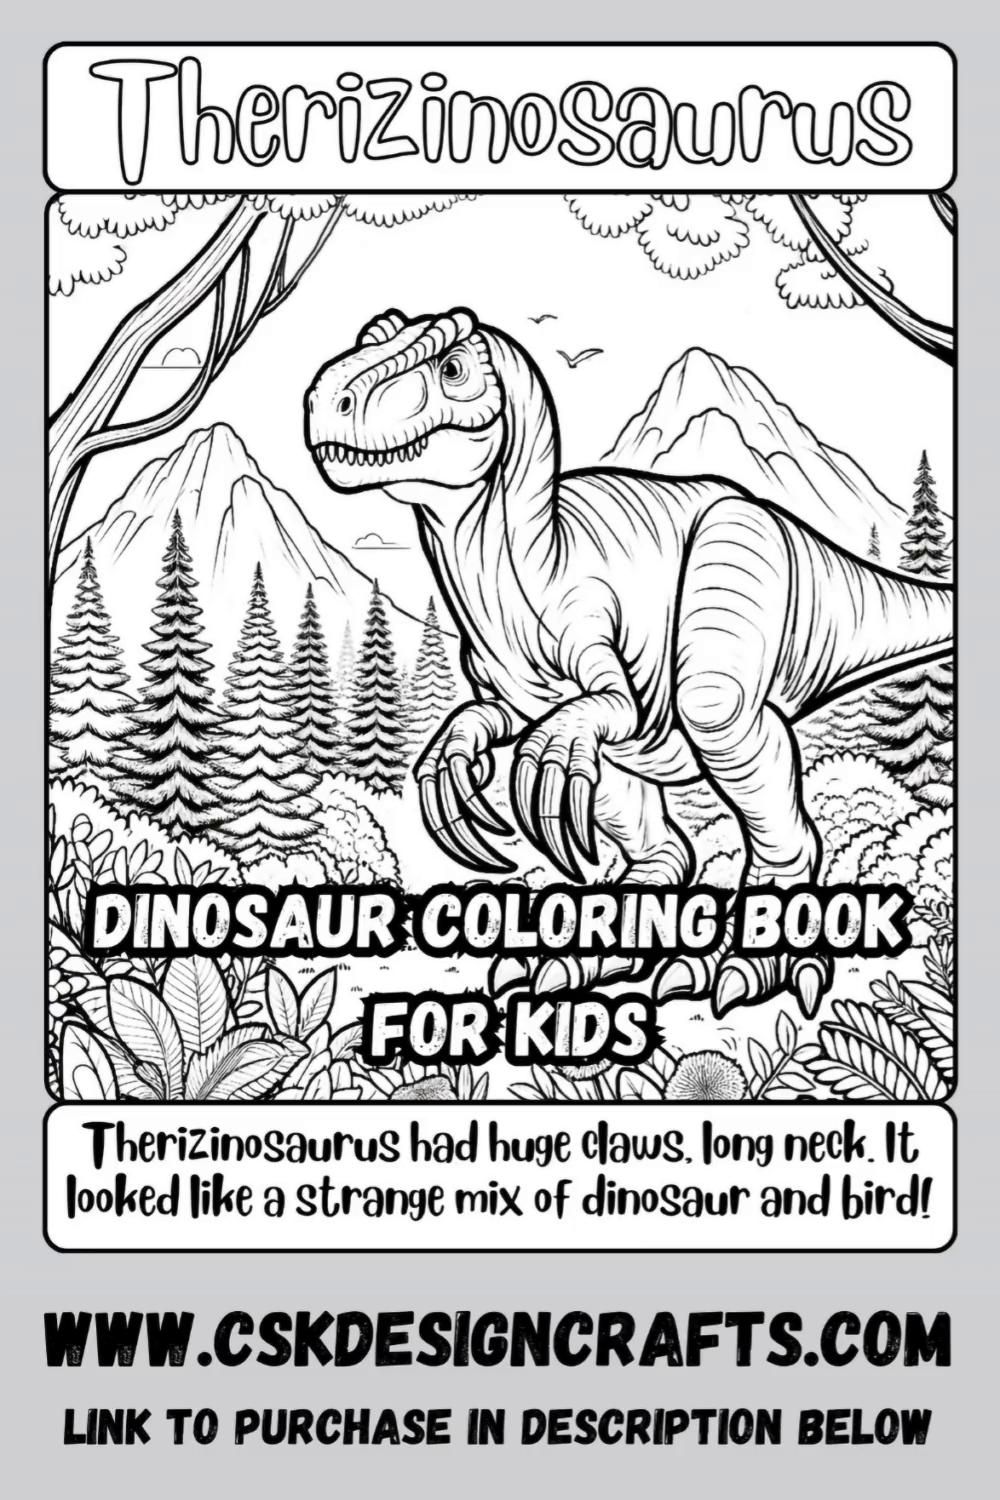 Jurassic Fun: A Dinosaur Coloring Activity! Step back in time! Experience the thrill of the Jurassic